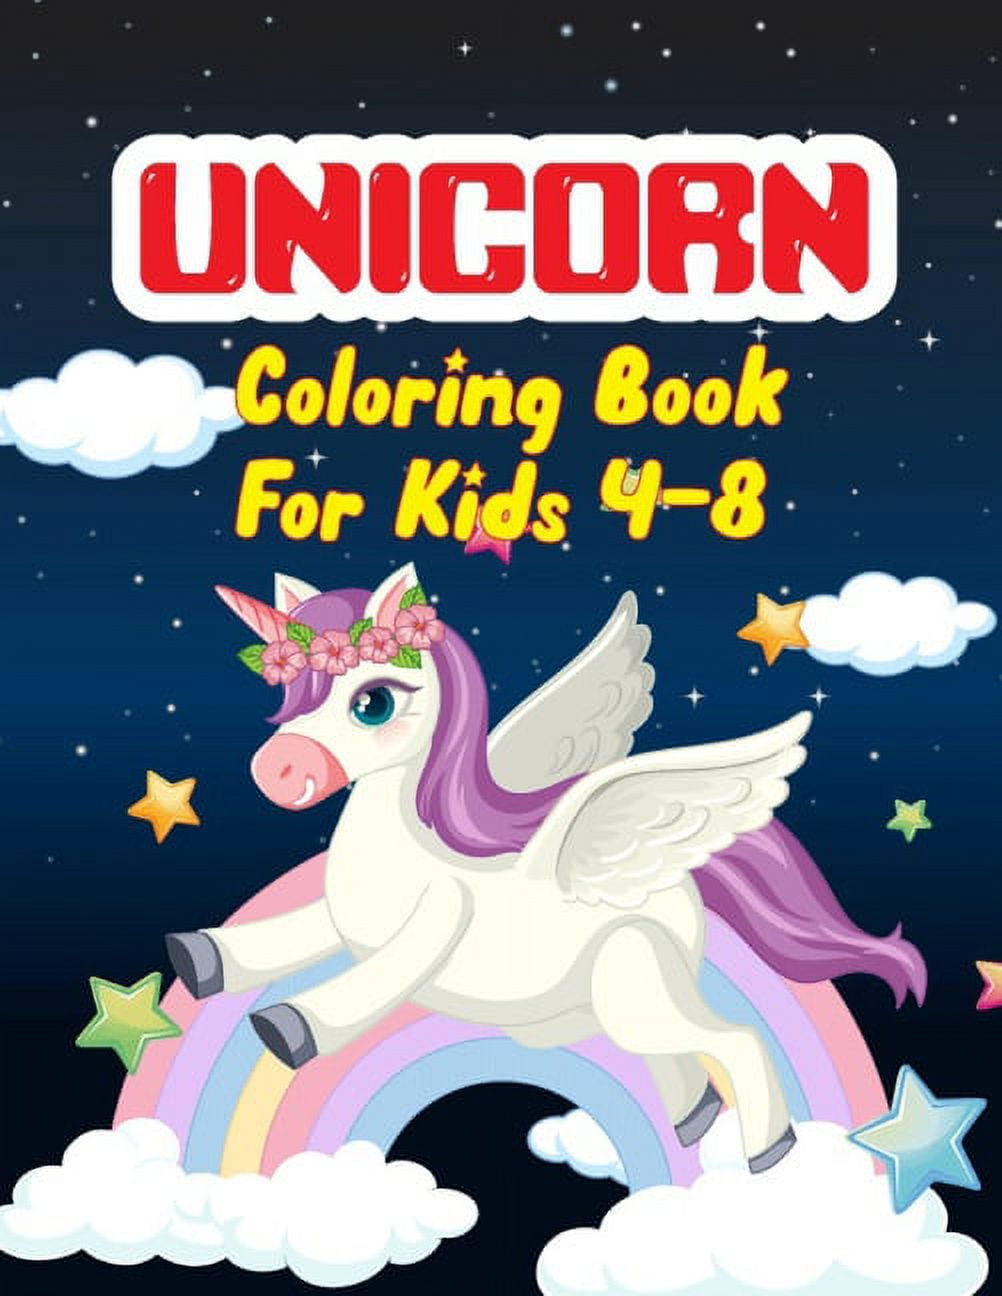 Unicorn Coloring Books for Girls ages 8-12: Unicorn Coloring Book for  Girls, Little Girls, Kids: New Best Relaxing, Fun and Beautiful Coloring  Pages B (Paperback)